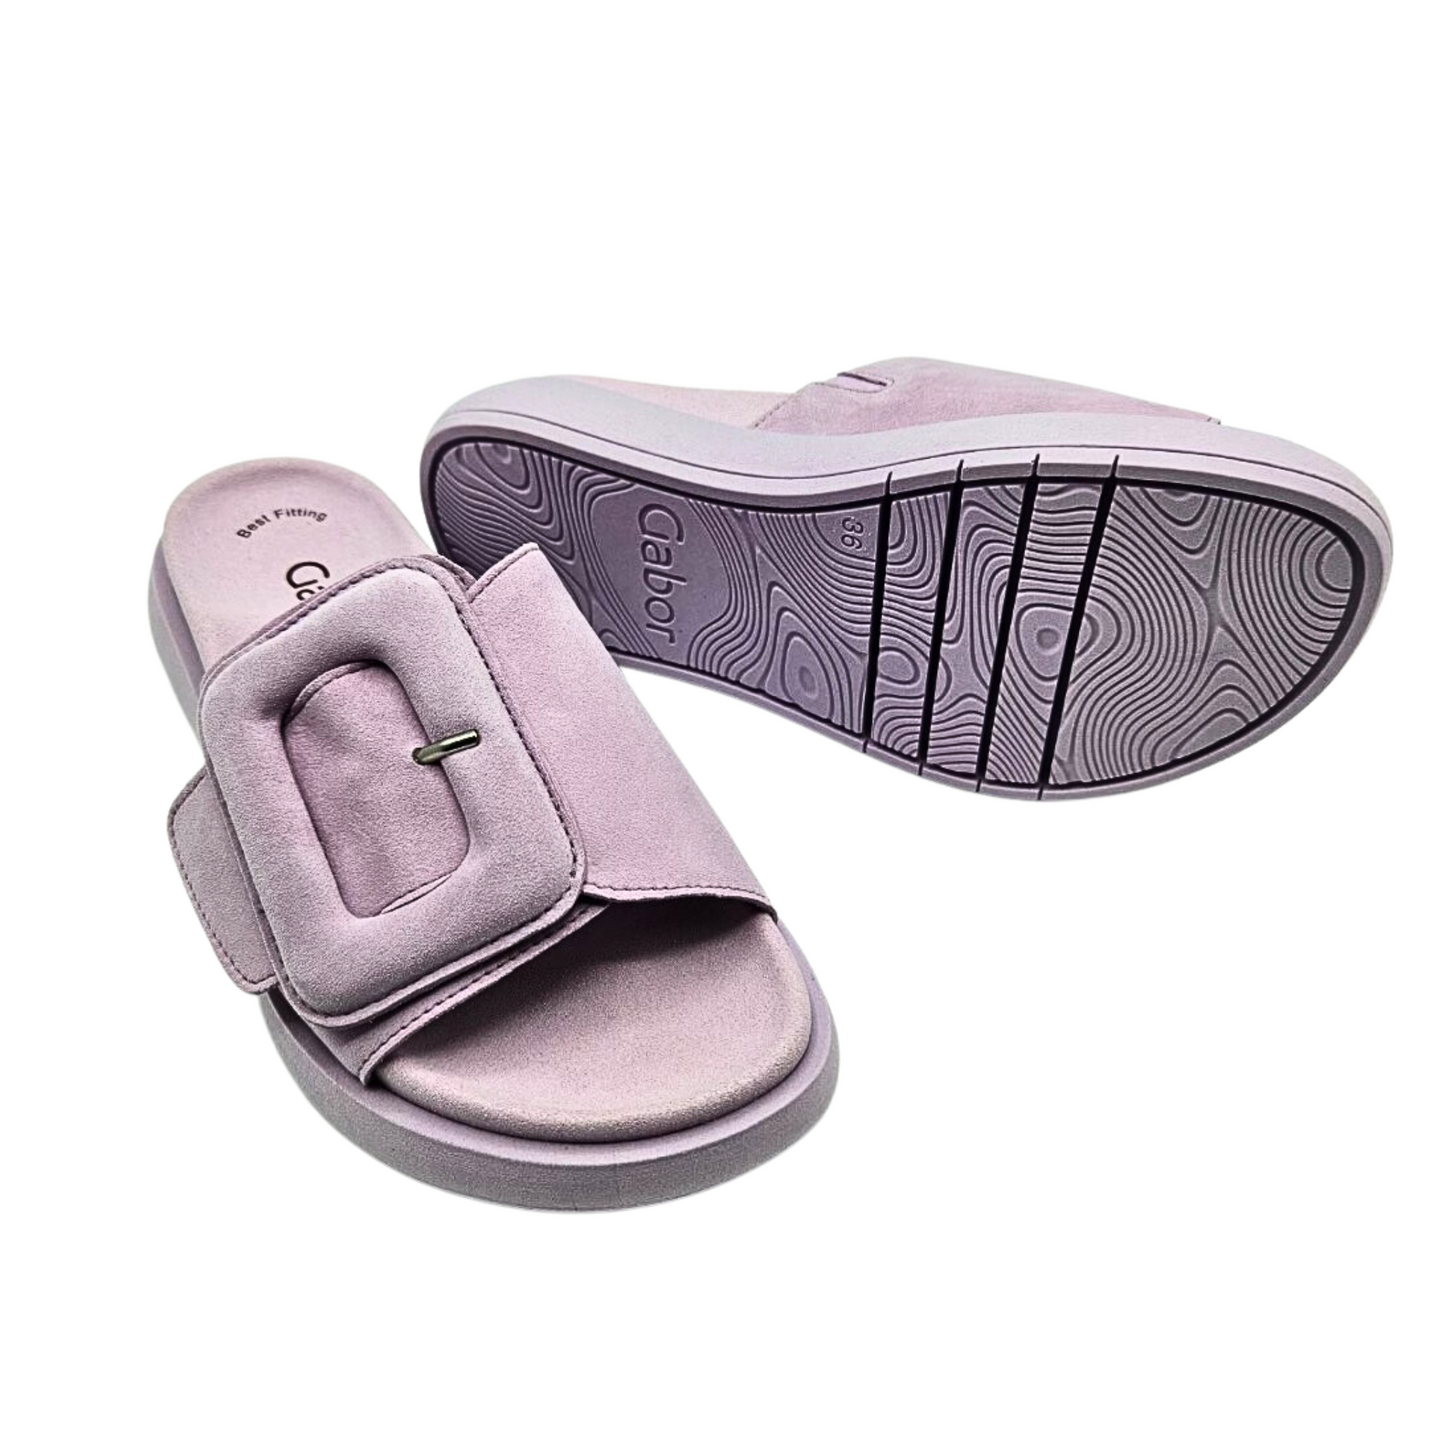 Angled side view of right shoe and sole of left.  Slides by Gabor called Hanover.  Wide, luxurious nubuk strap across all of forefoot, open toe and open heel.  Large decorative buckle slightly off center to the outside